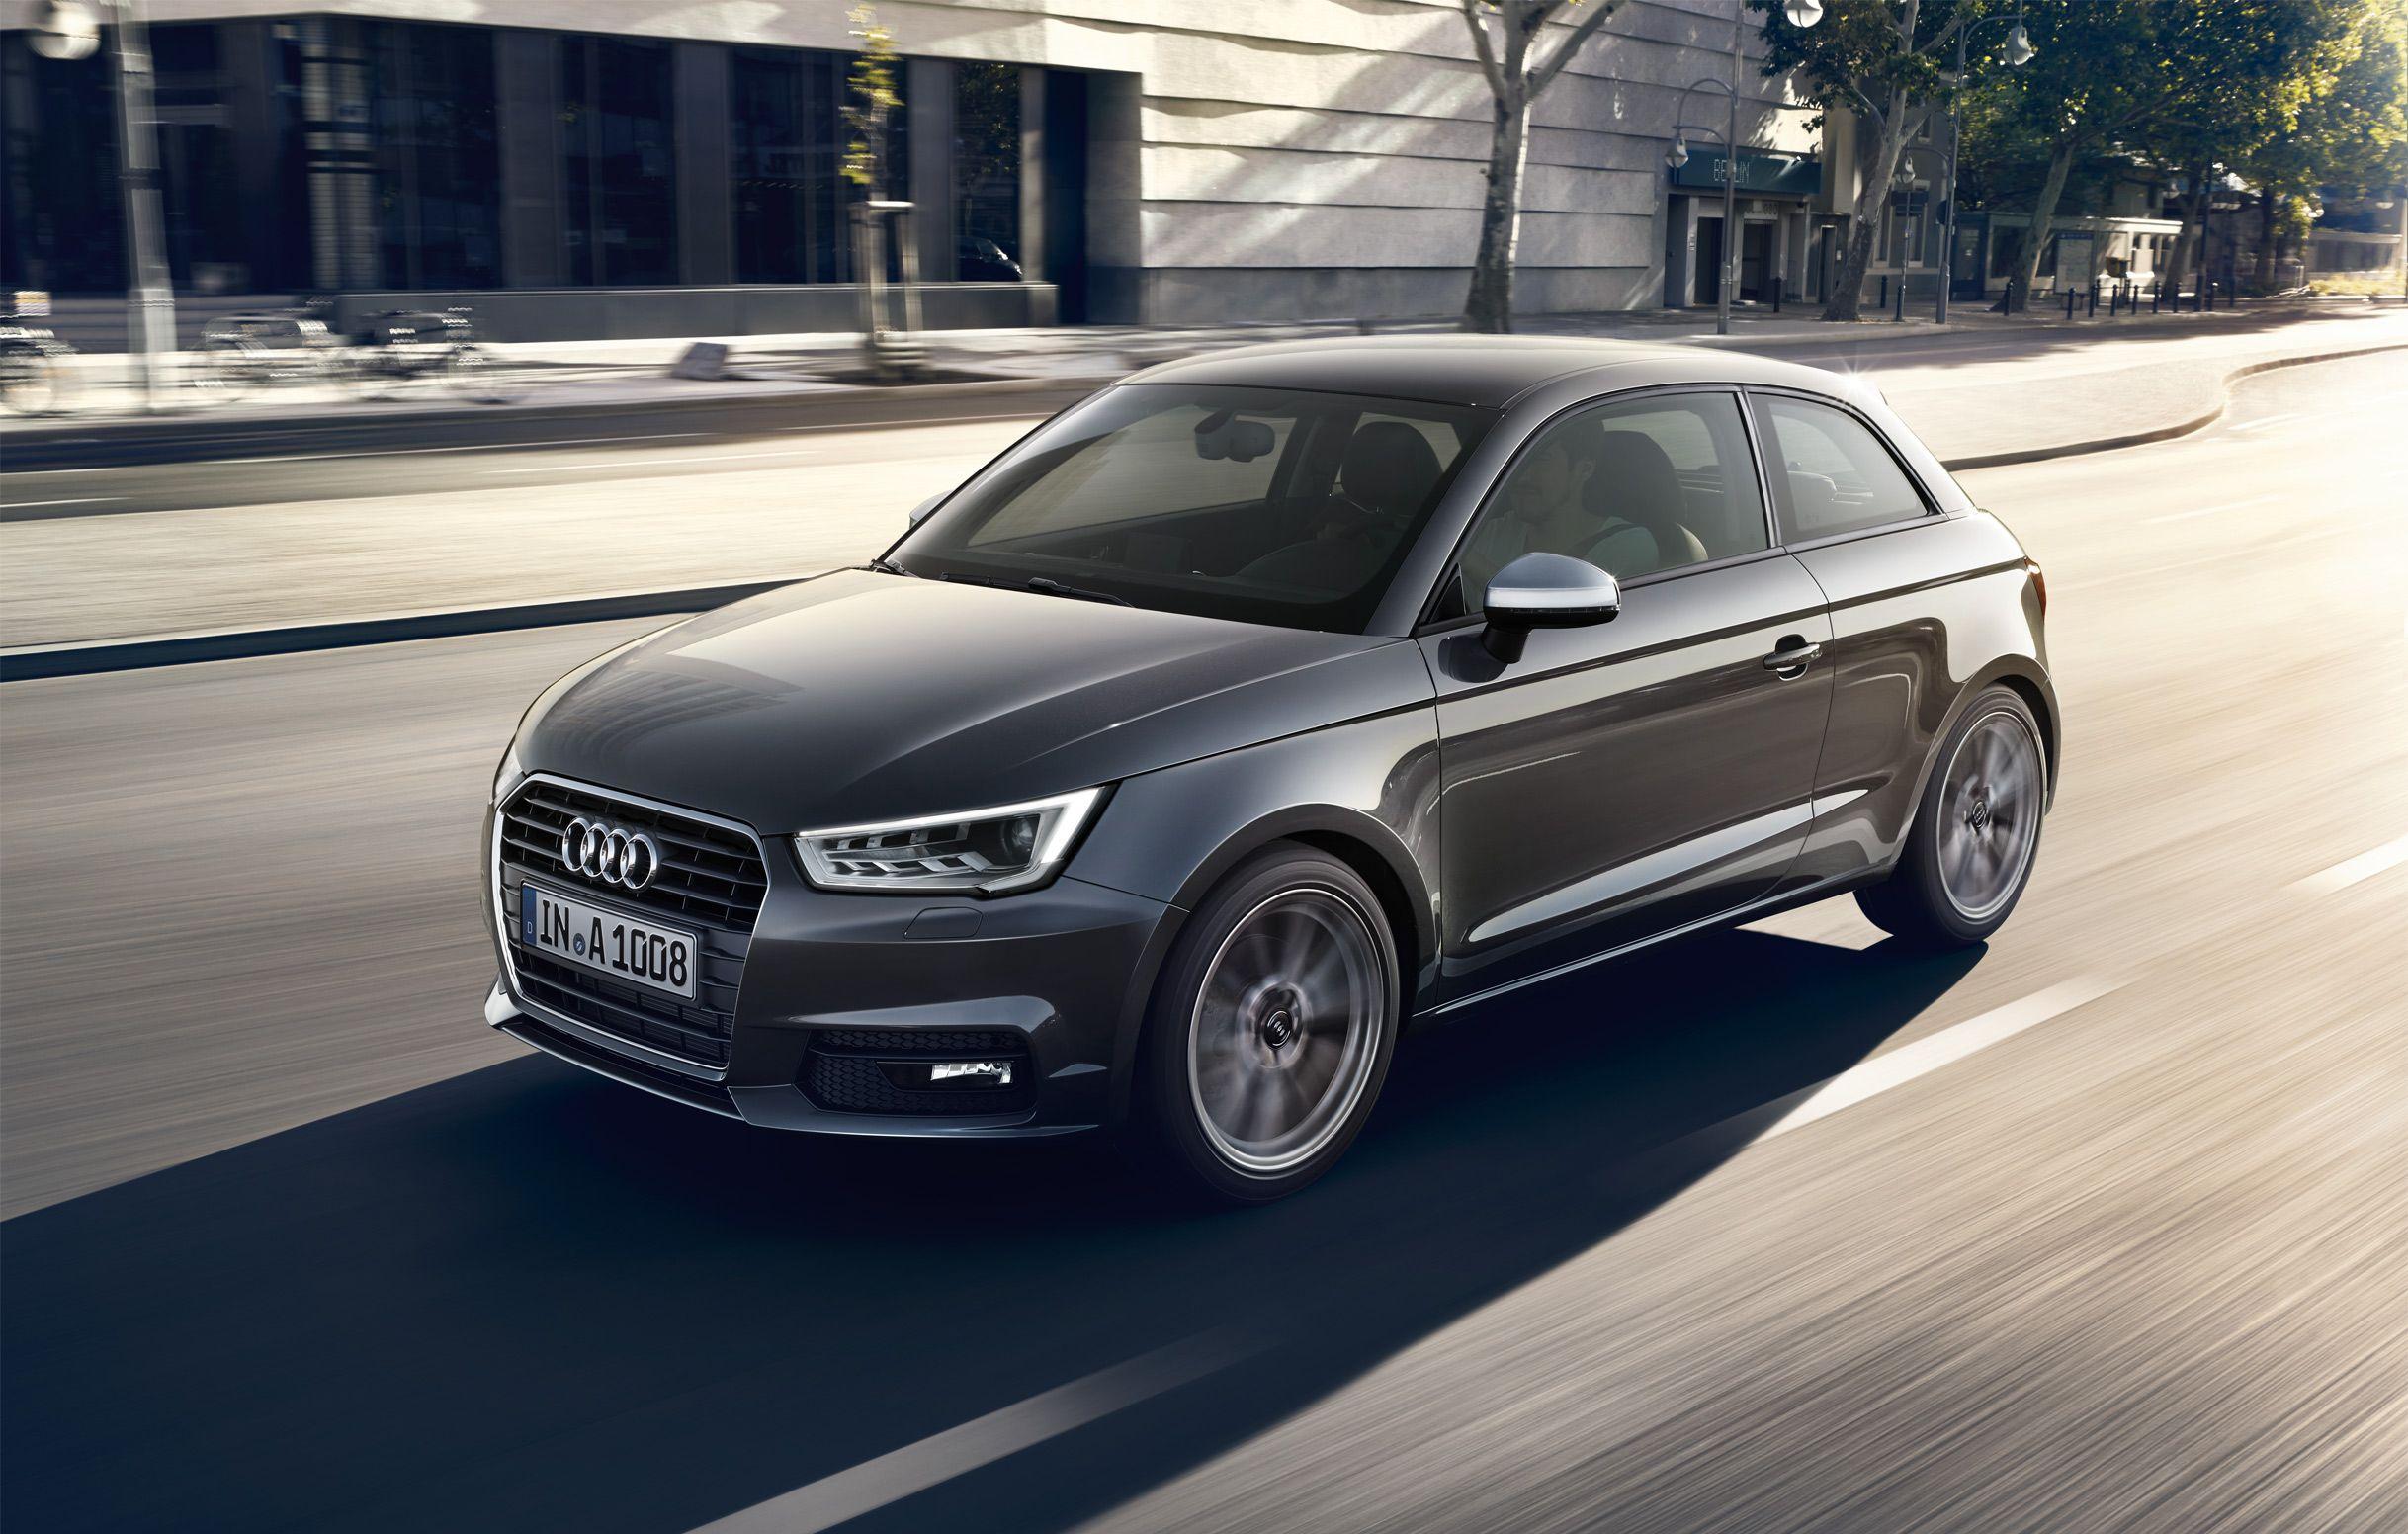 HD Audi A1 Wallpapers and Photos